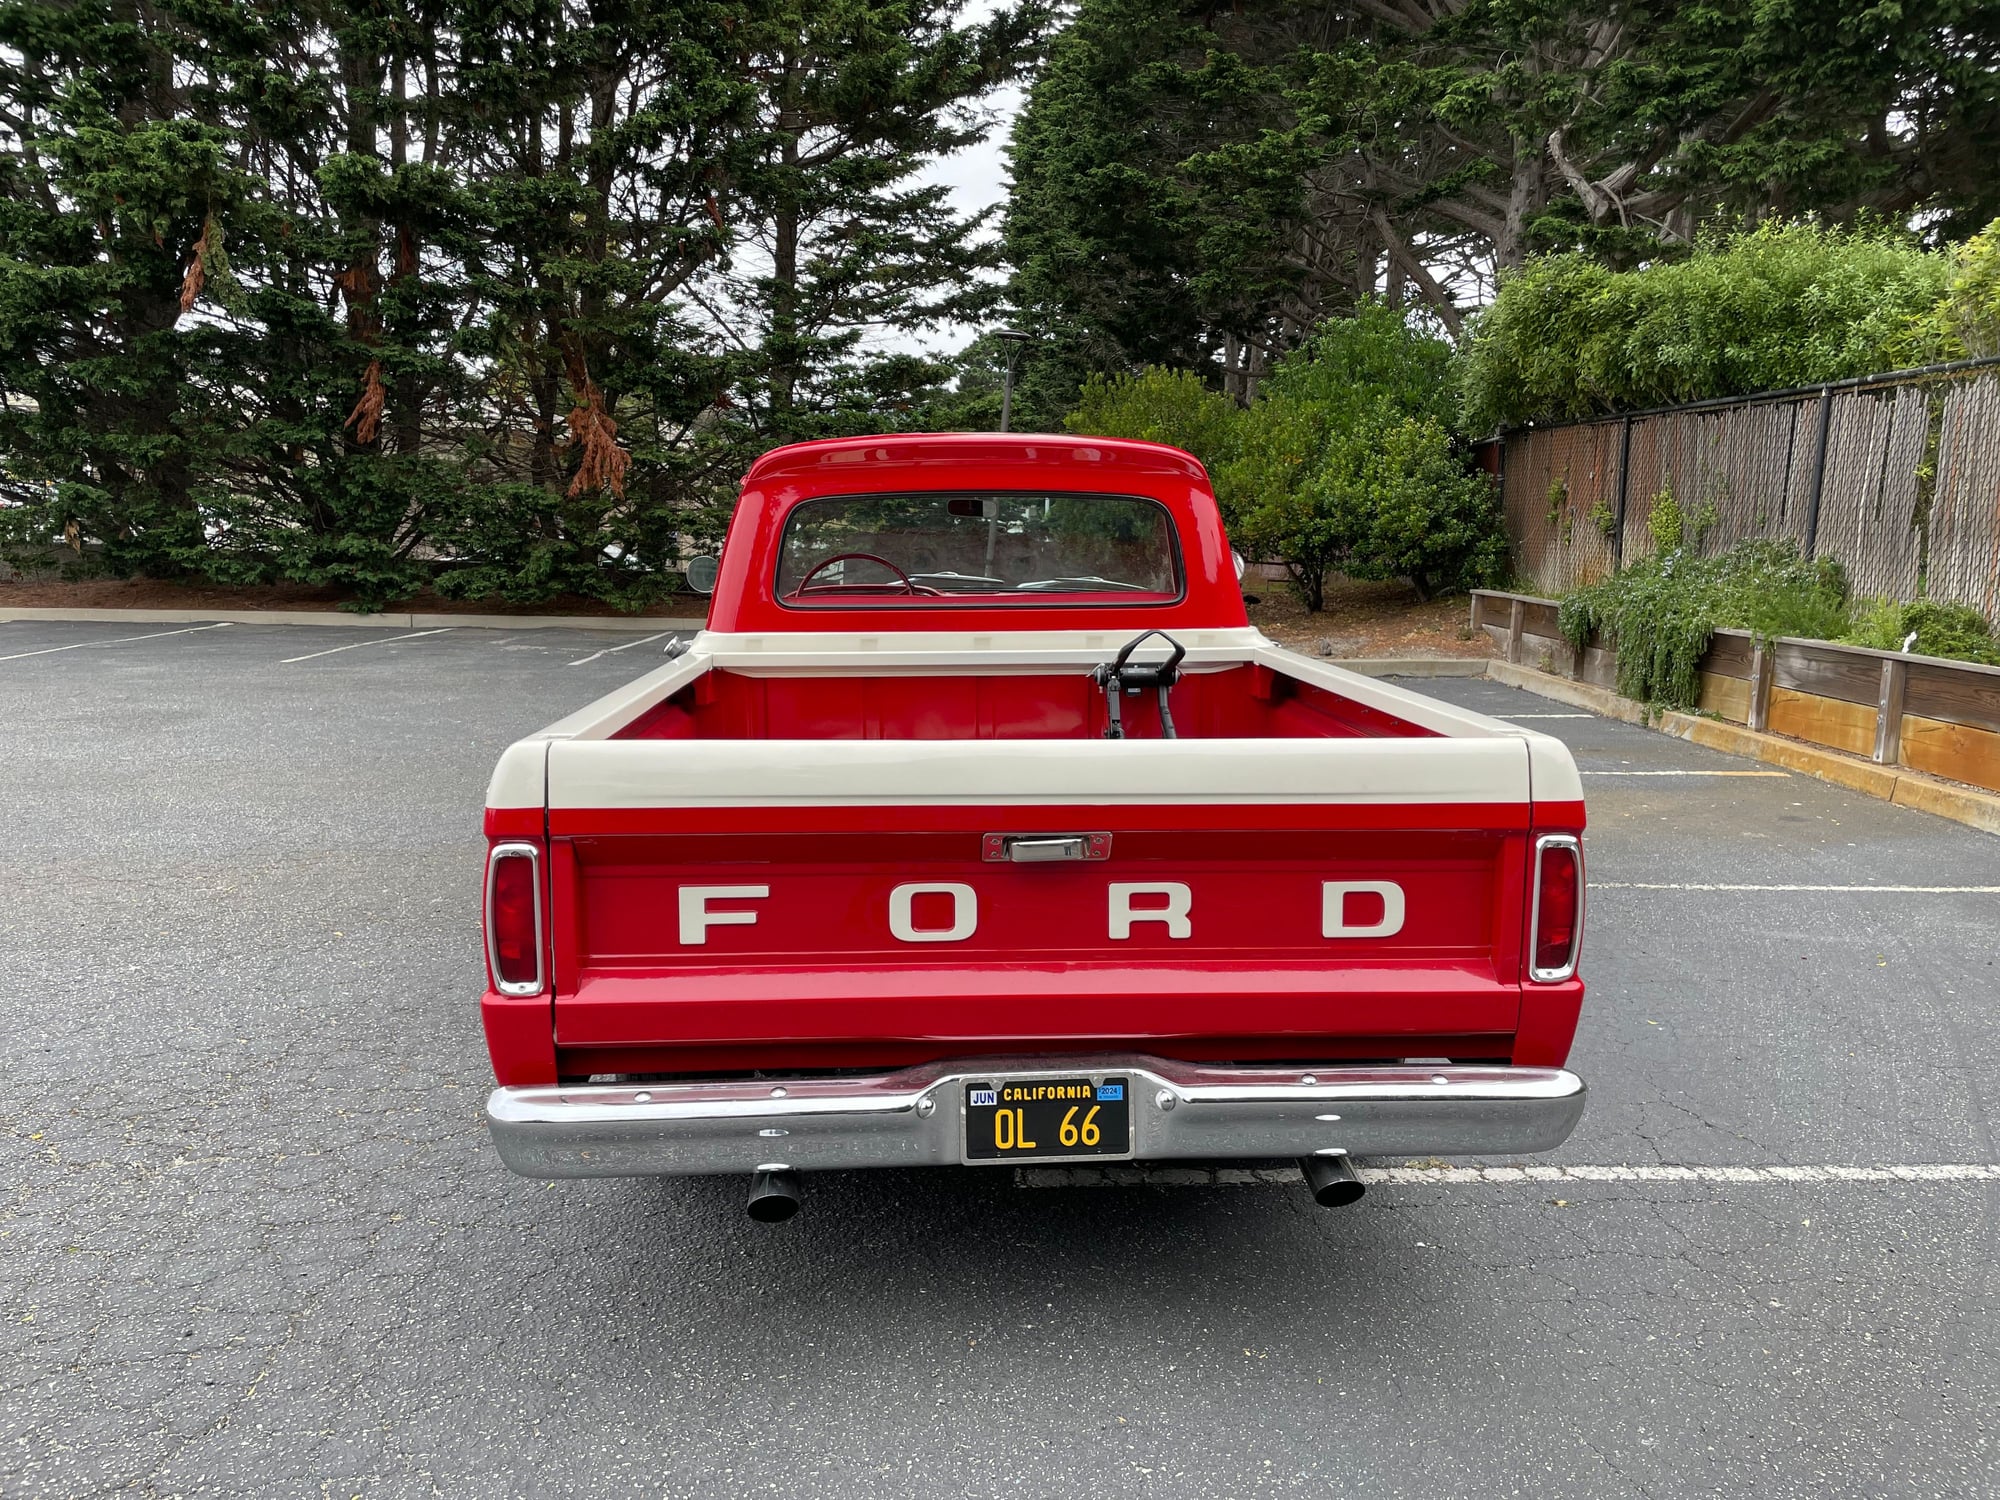 1966 Ford F-100 - 1966 Ford F-100 Custom Cab for sale - Used - VIN F1OAL792130 - 35,475 Miles - 8 cyl - 2WD - Automatic - Truck - Other - Carmel, CA 93921, United States